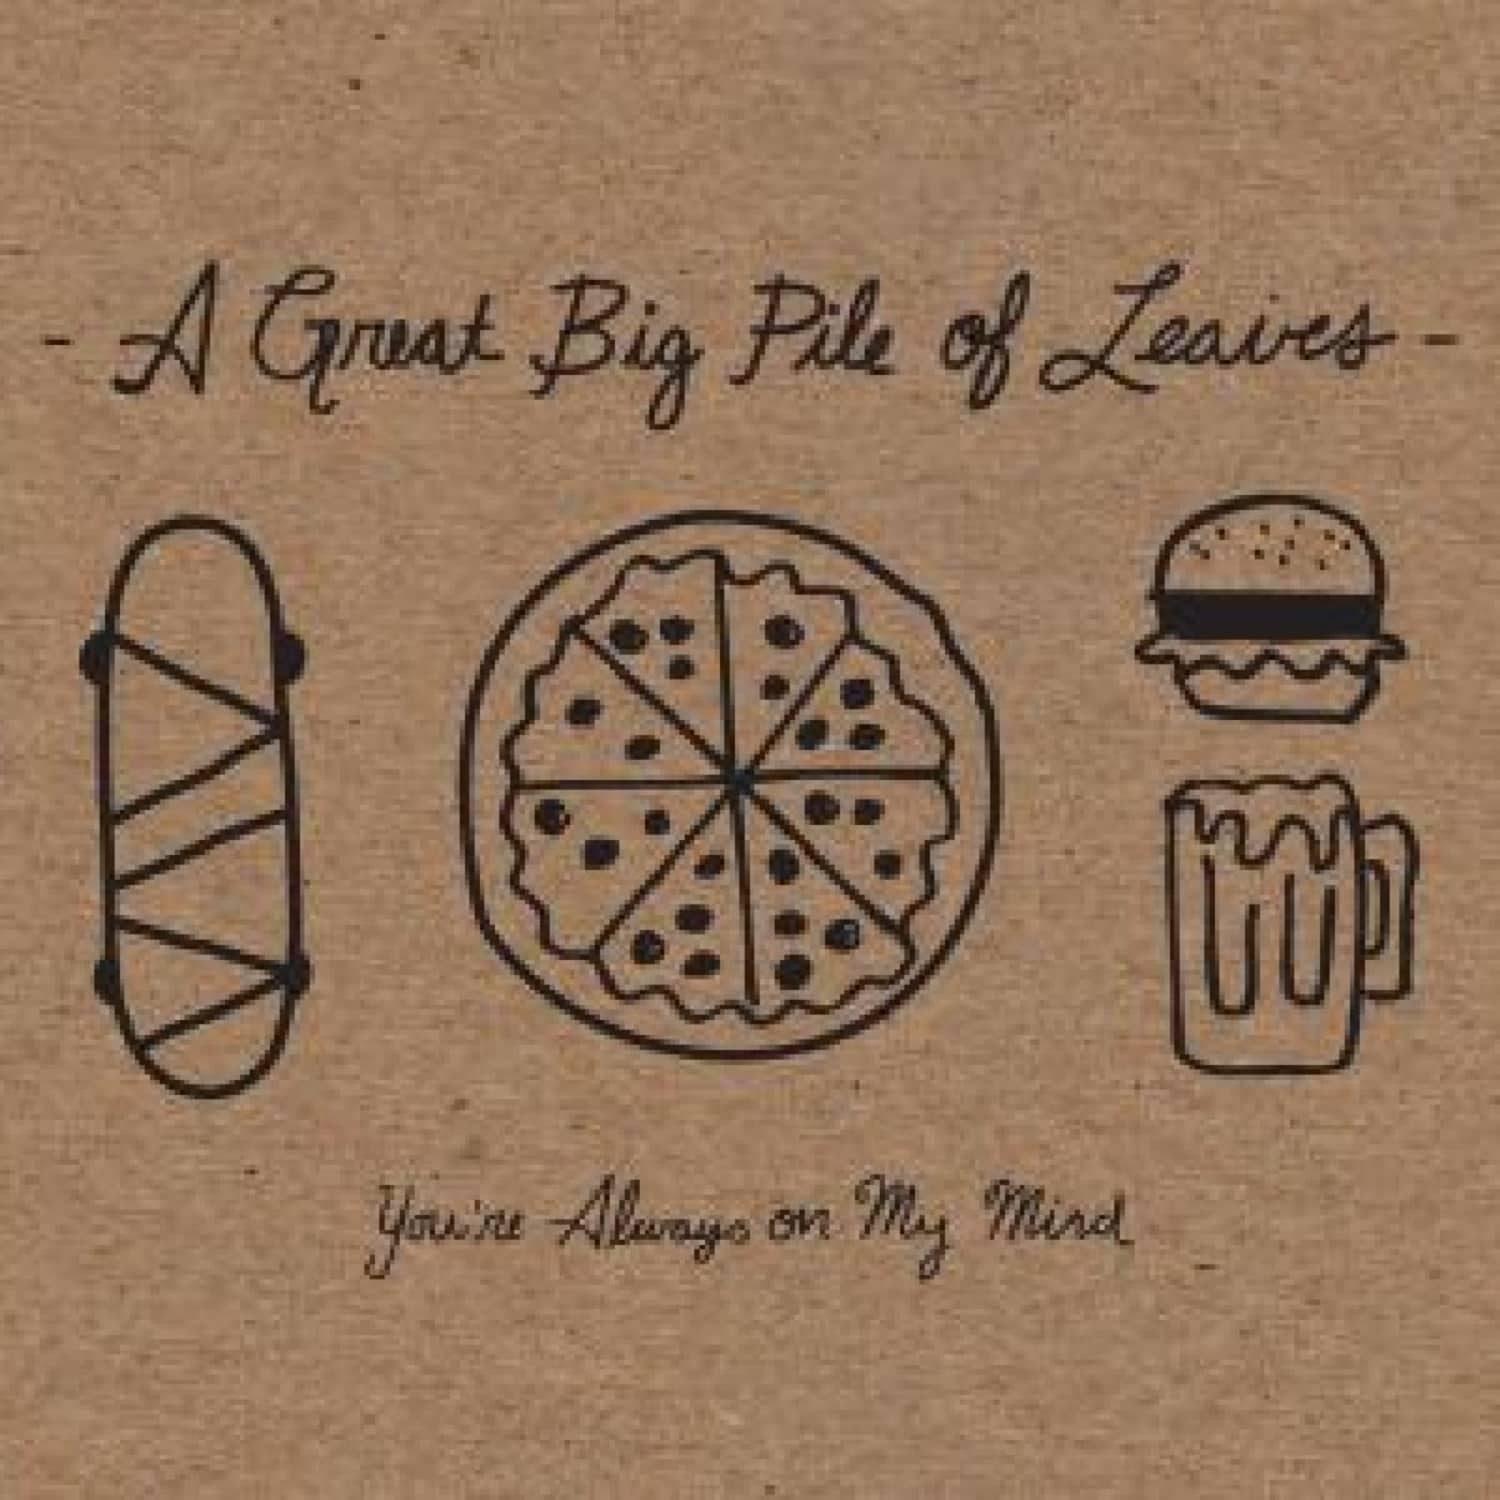 A Great Big Pile Of Leaves - YOU RE ALWAYS ON MY MIND 